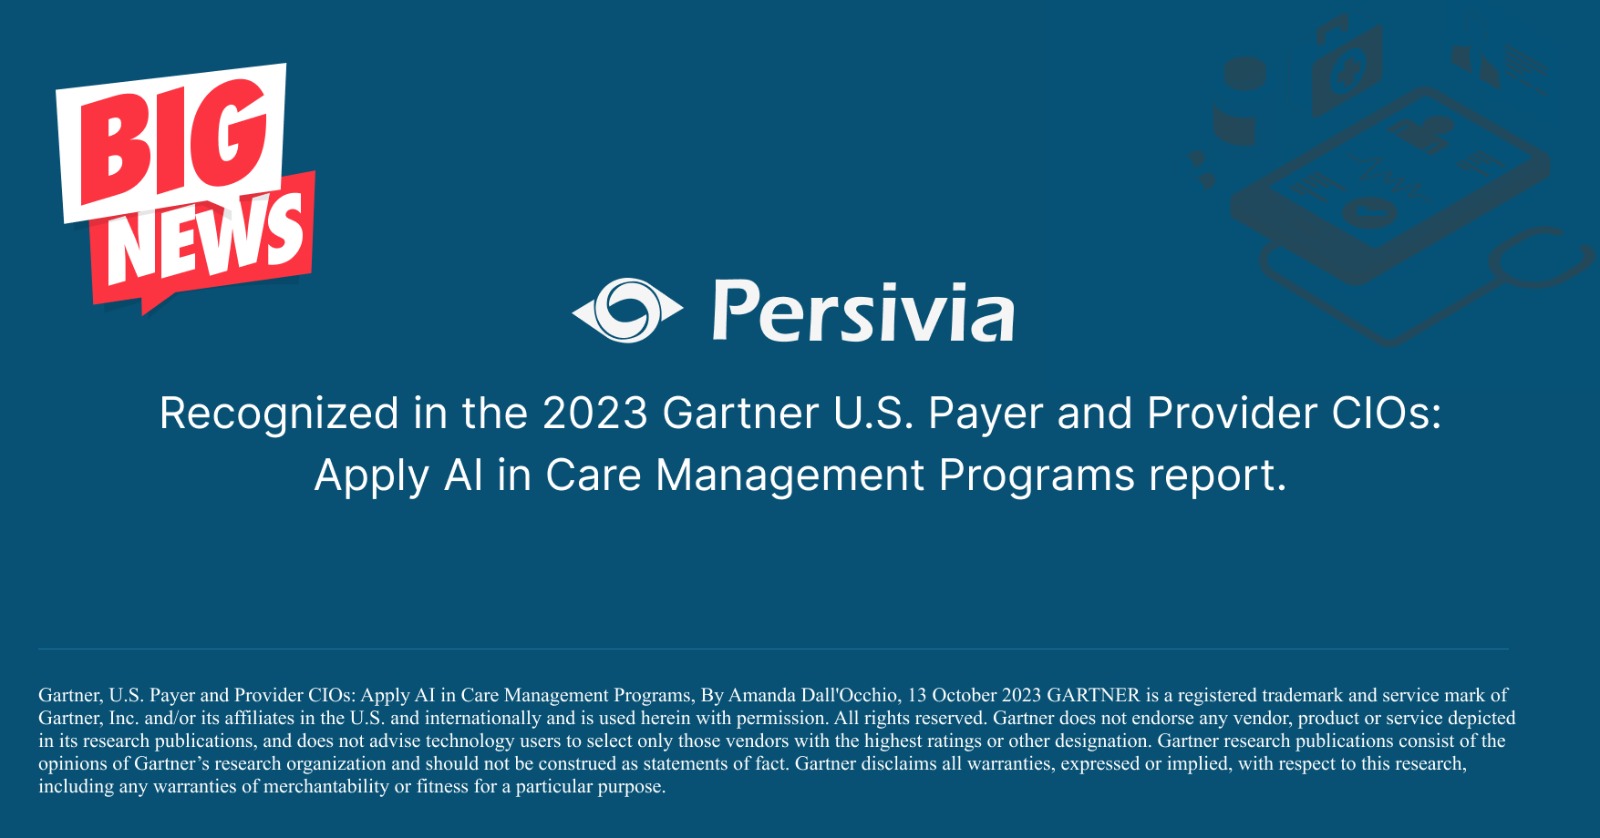 Persivia recognized in the Gartner Research report on AI Applications in Care Management Programs